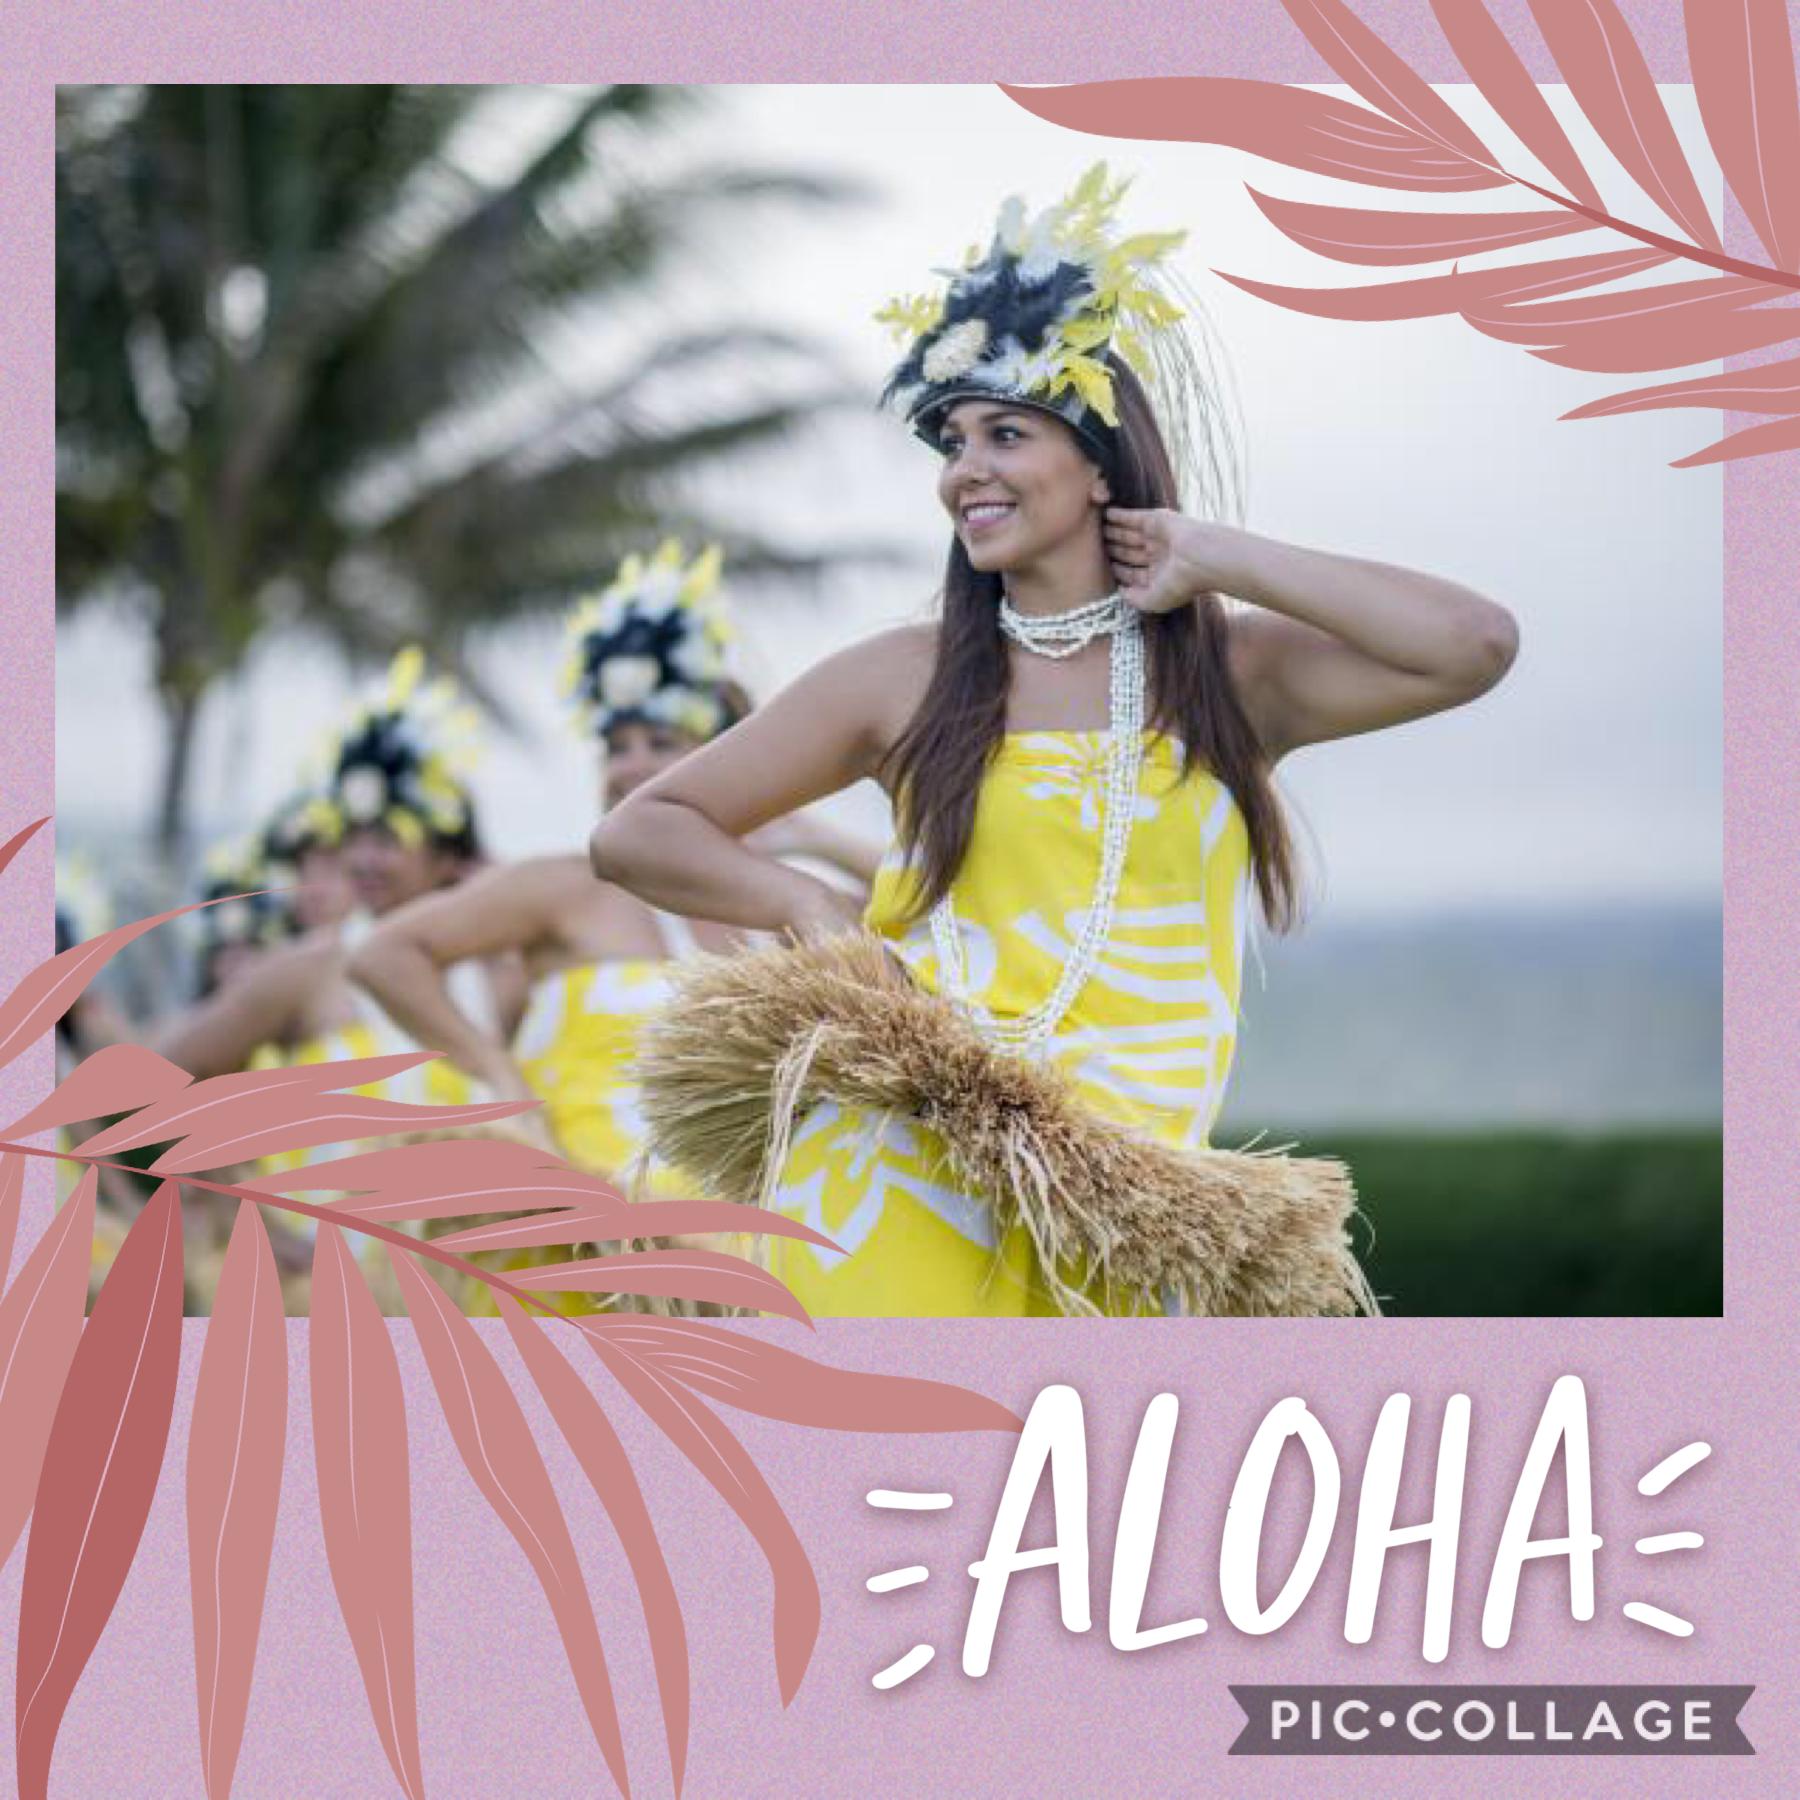 Although we can’t head down to the beach tonight... ~ALOHA~ 